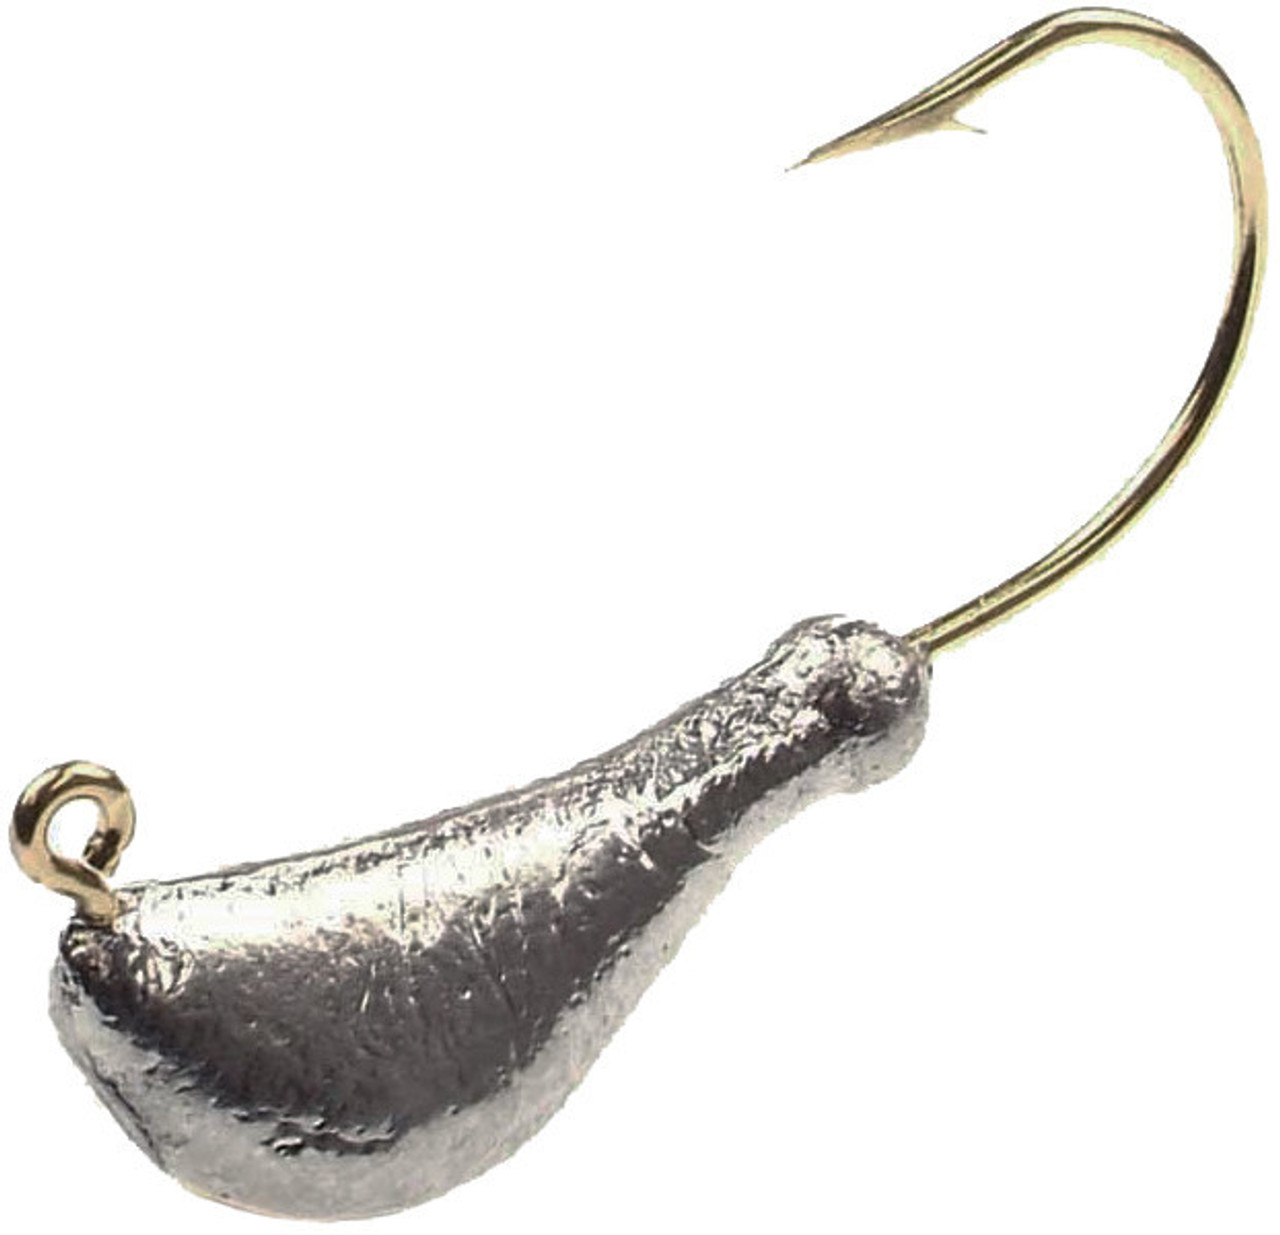 Do-It Round Head Standard Jig Molds Barb Collar - Barlow's Tackle